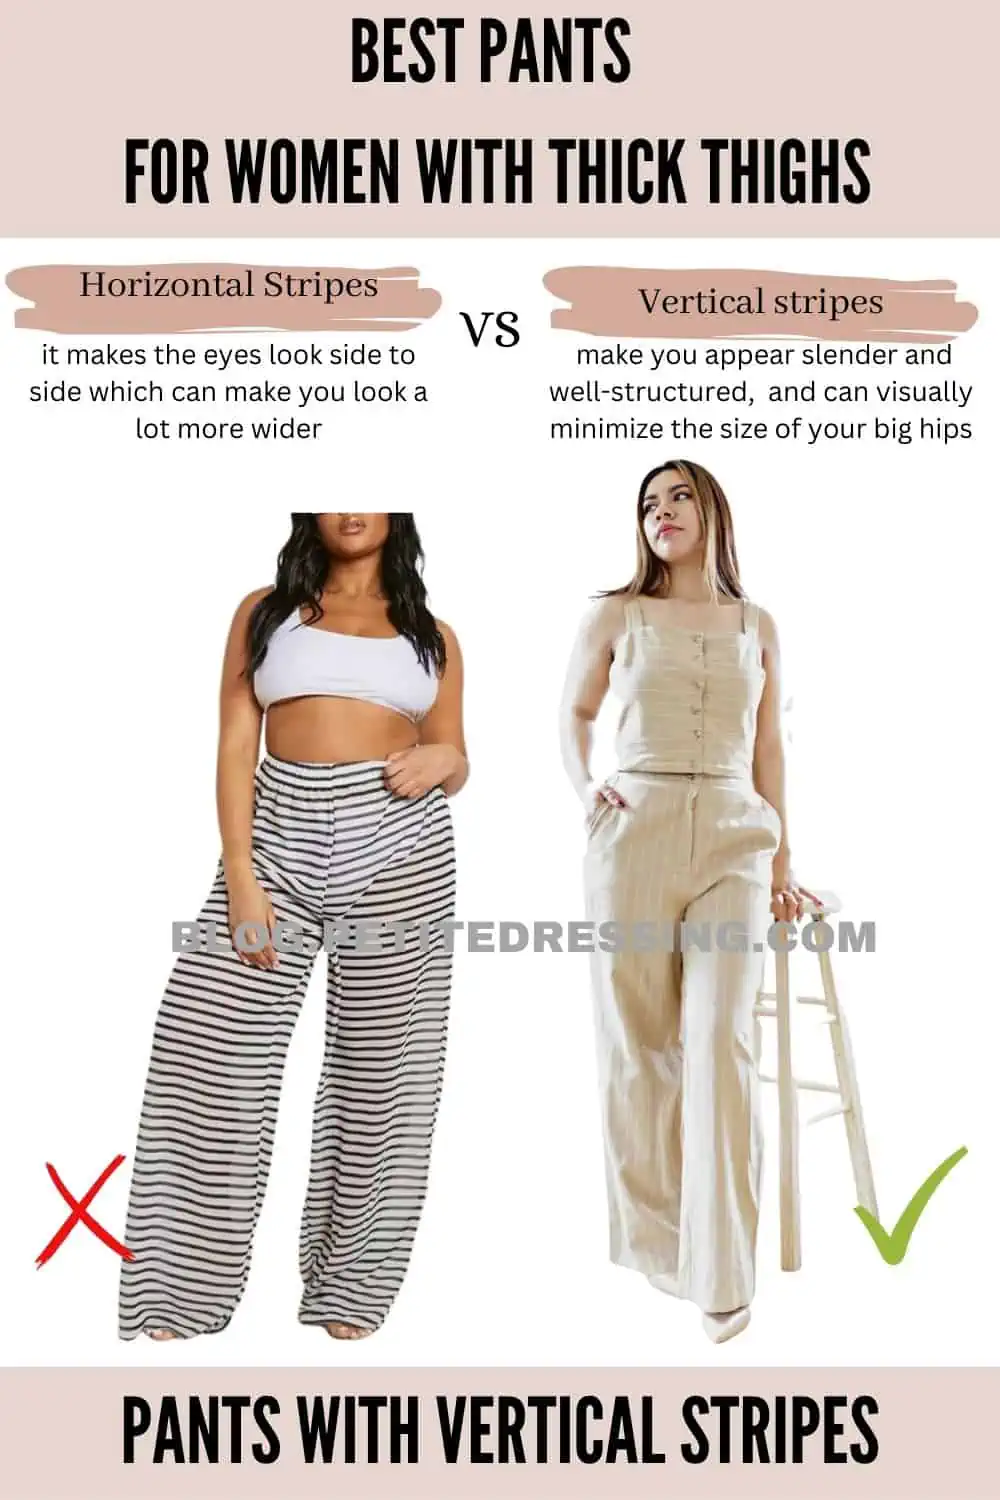 Different Types of Pants in Fashion - The Creative Curator